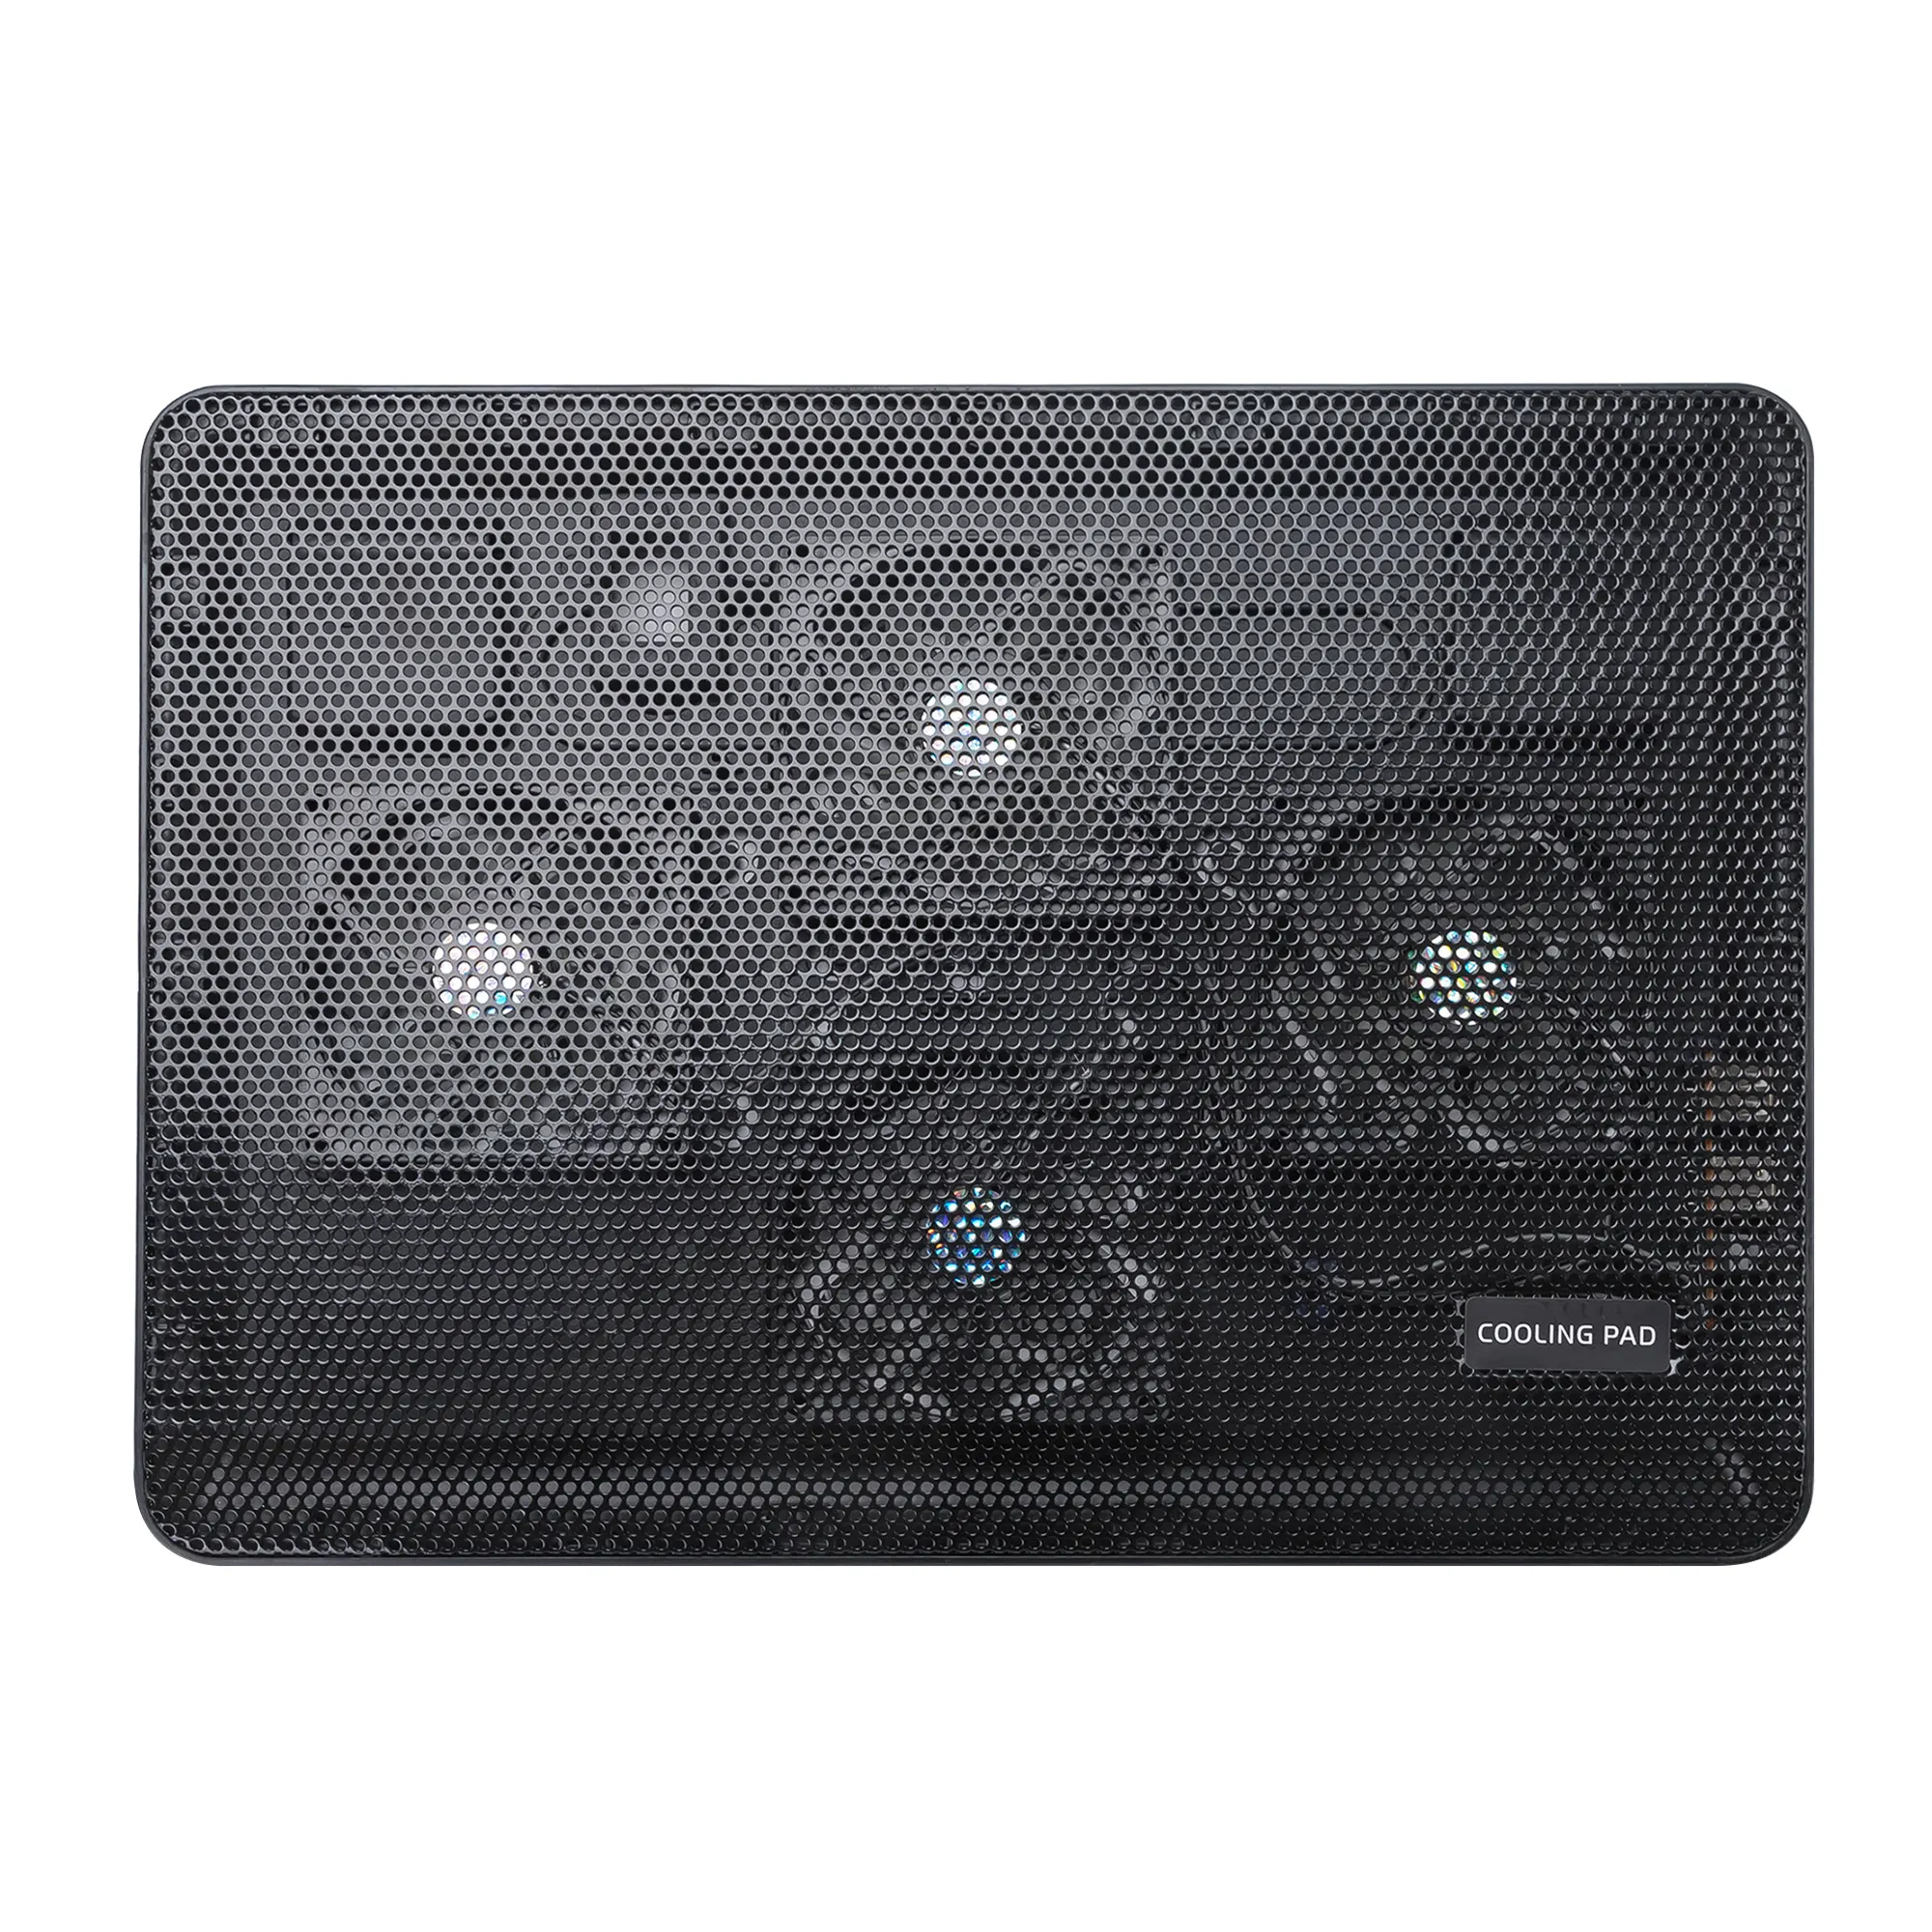 Hot Selling Notebook Cooler 4 fans Gaming Laptop Cooling Pad Base Notebook cooling Fan Bracket